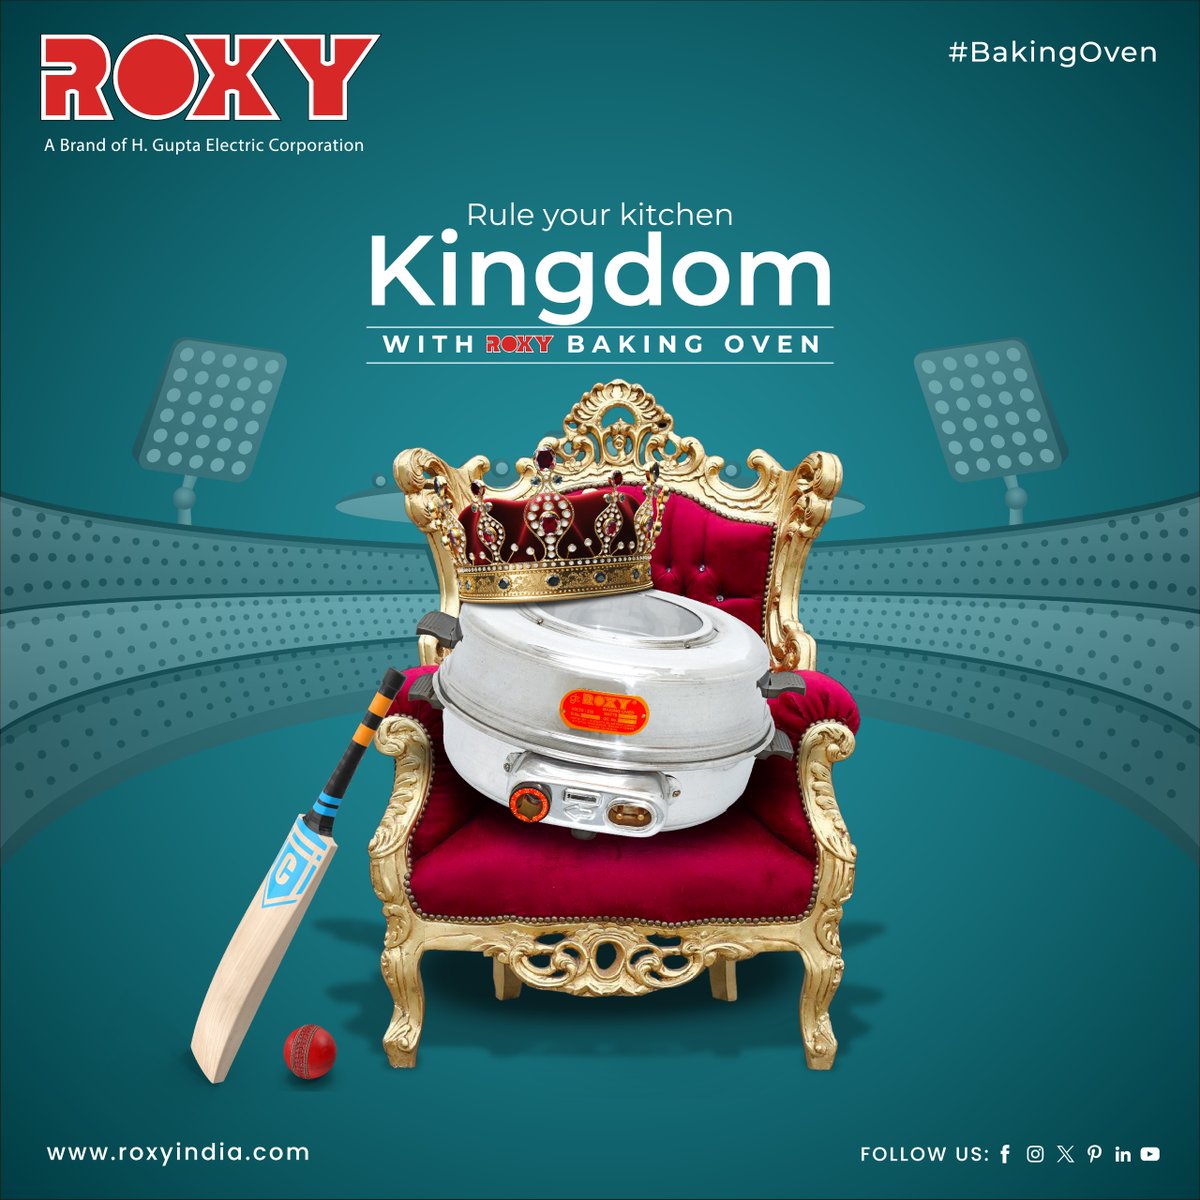 Elevate your culinary creations with precision and style. 🍳🔥 From cakes to roasts, #RoxyBakingOven helps you conquer every recipe with confidence . . . . For more visit:- roxyindia.com . . . . #ChefLife #KitchenMagic #CookingGoals #FoodieFaves #DeliciousDishes